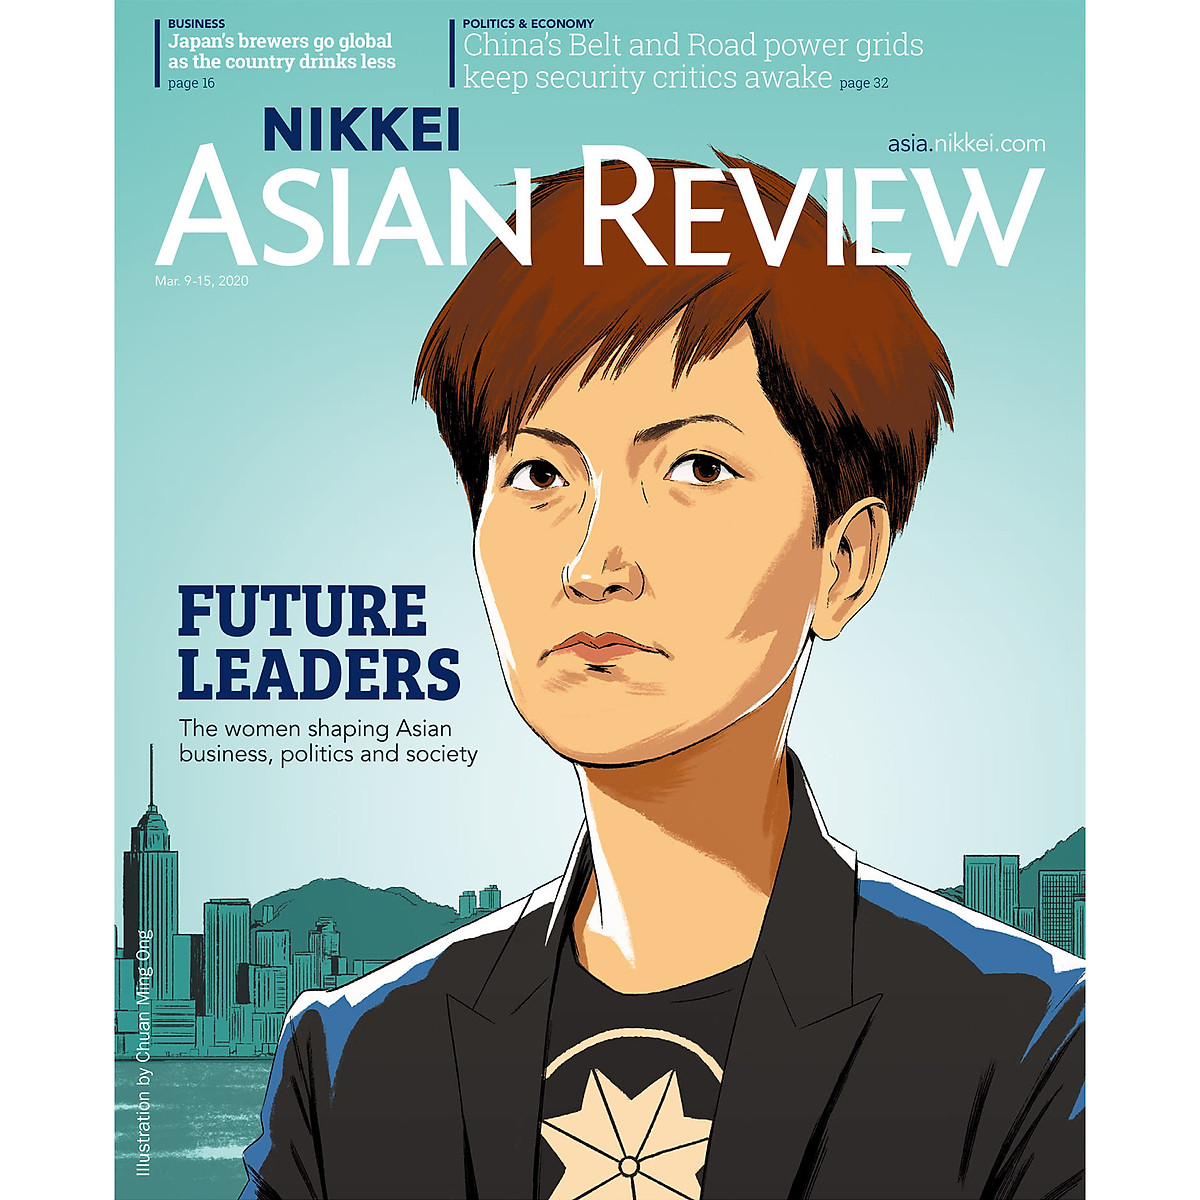 Nikkei Asian Review: Future Leaders - 10.20, Mar 9-15, 2020